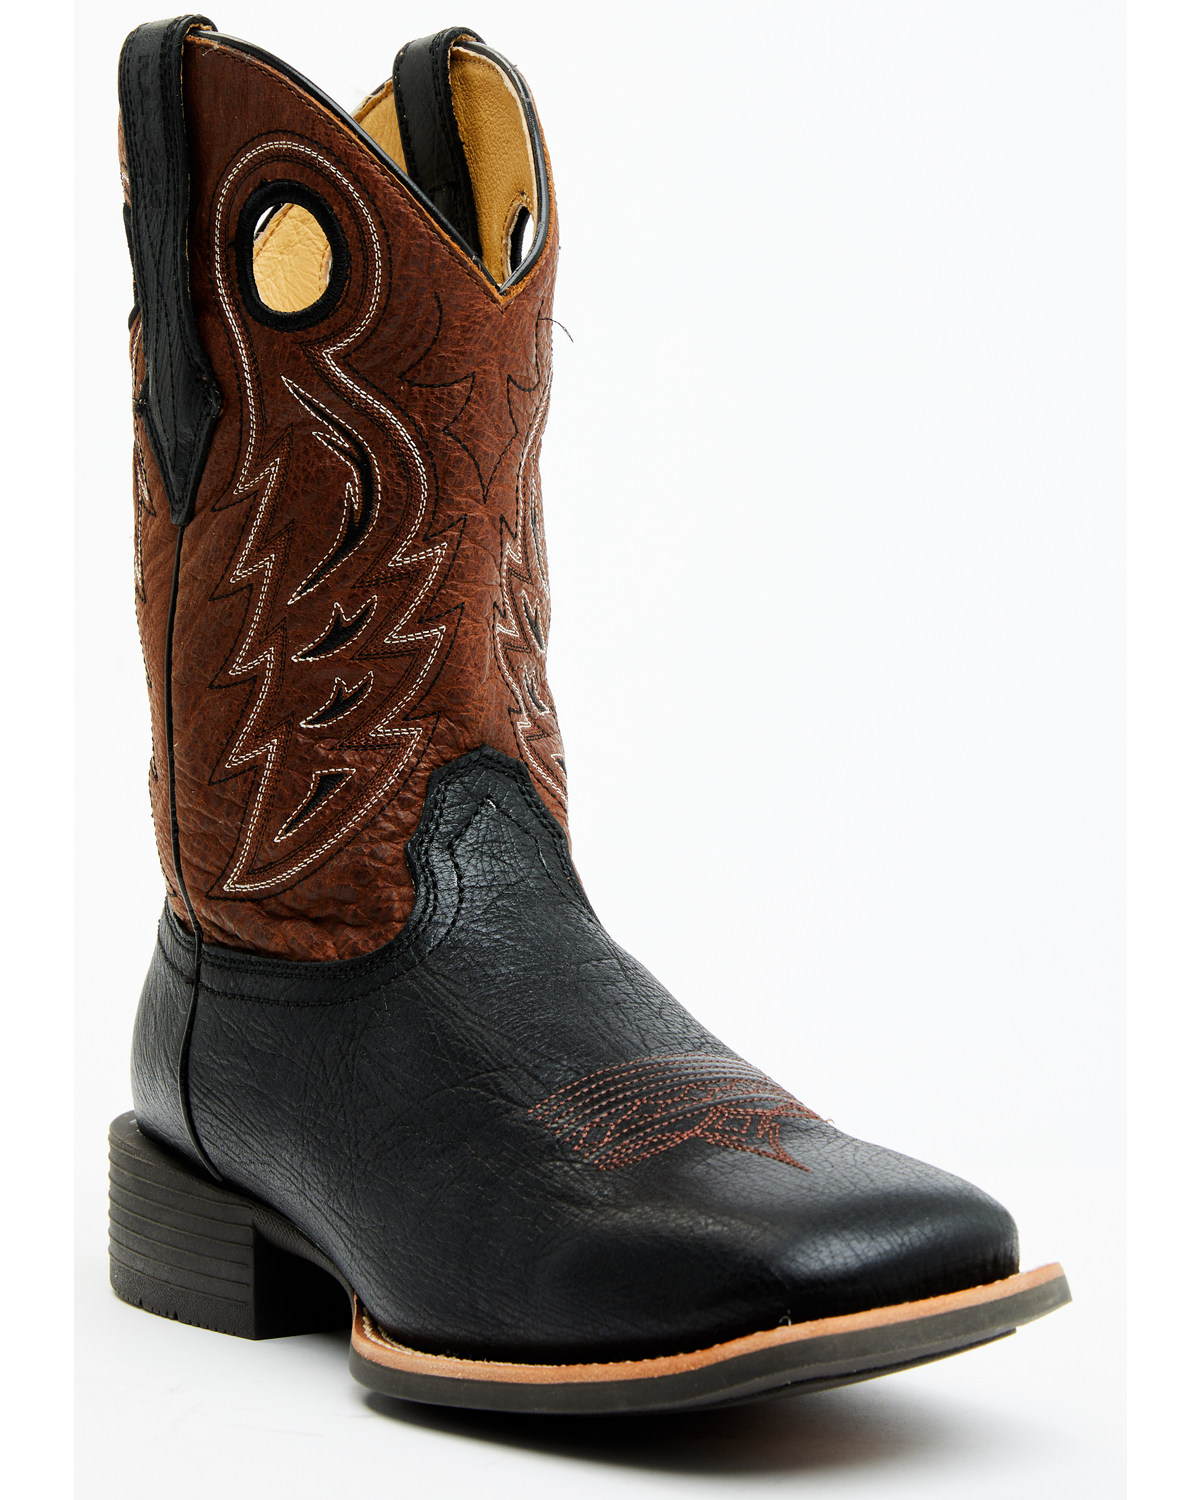 RANK 45® Men's Warrior Performance Western Boots - Broad Square Toe